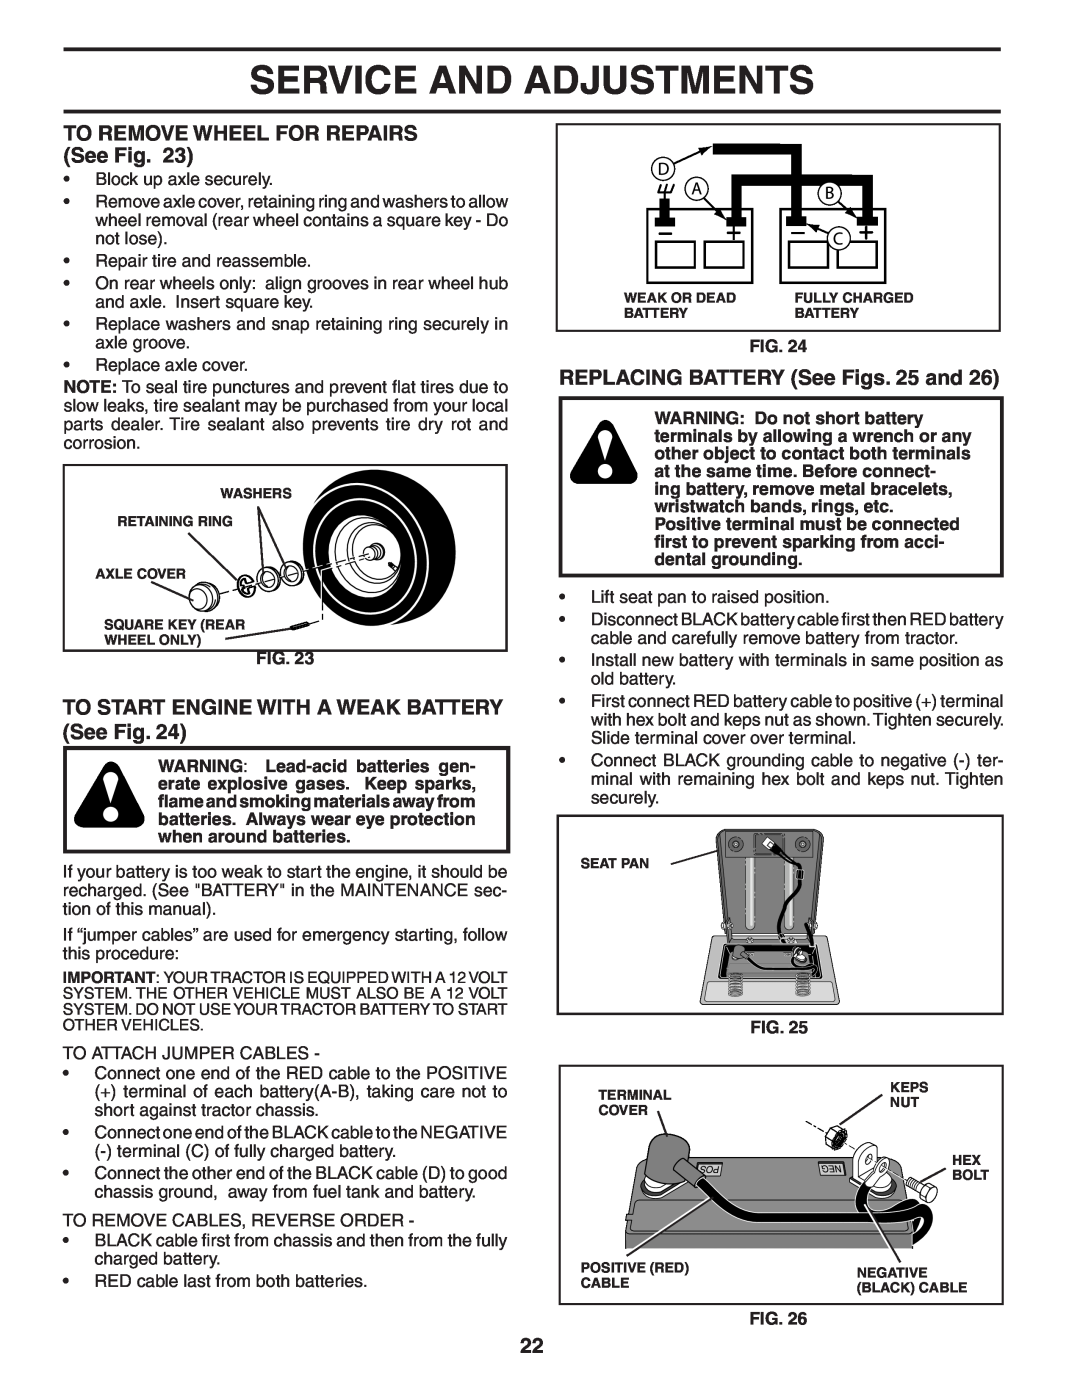 Weed Eater WE12538M manual TO REMOVE WHEEL FOR REPAIRS See Fig, TO START ENGINE WITH A WEAK BATTERY See Fig 